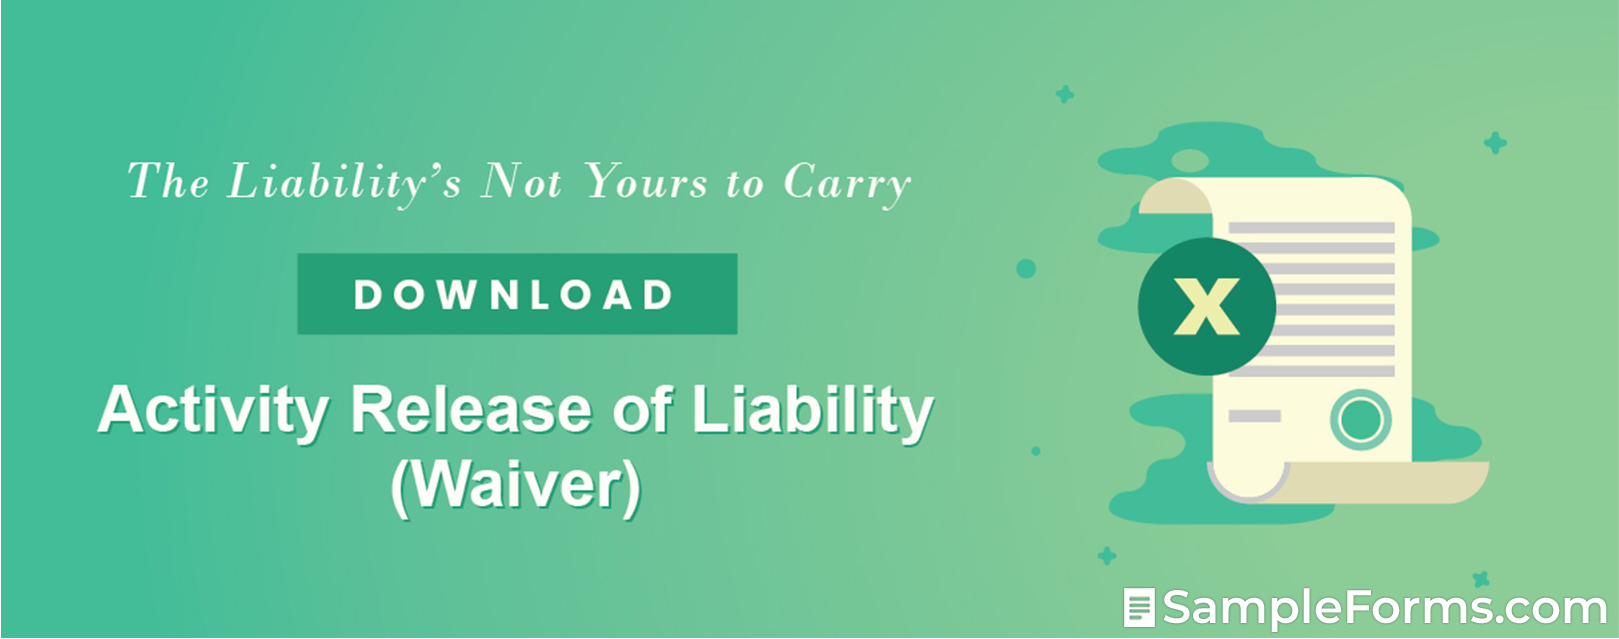 Activity Release of Liability Waiver